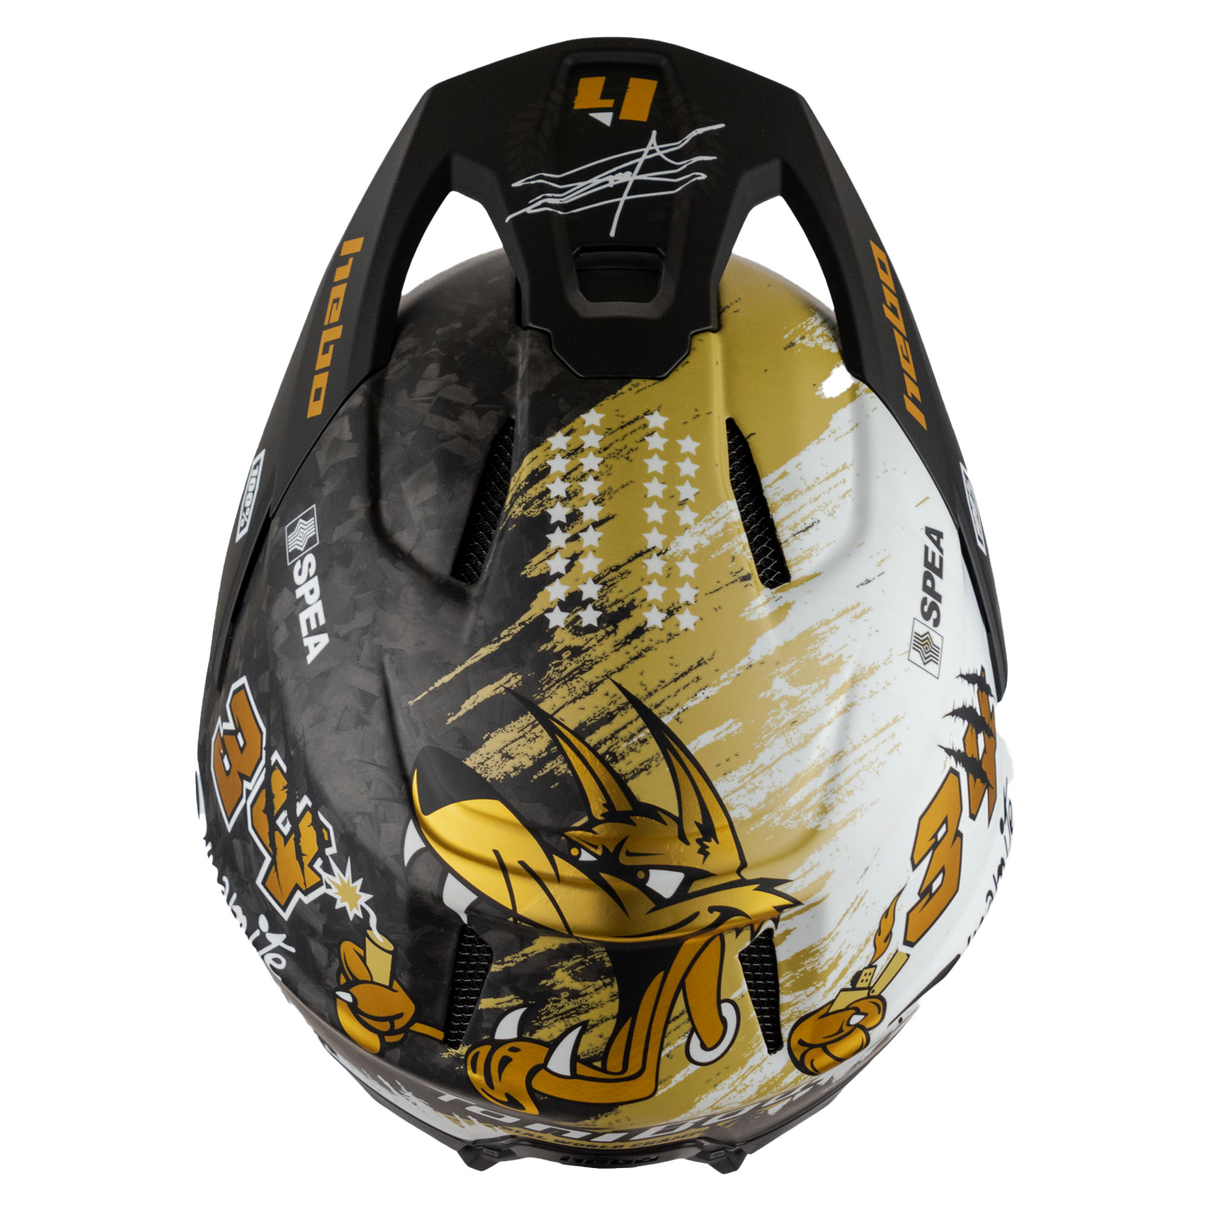 Hebo Trials Helmet Zone Race Toni Bou 34 Limited Edition